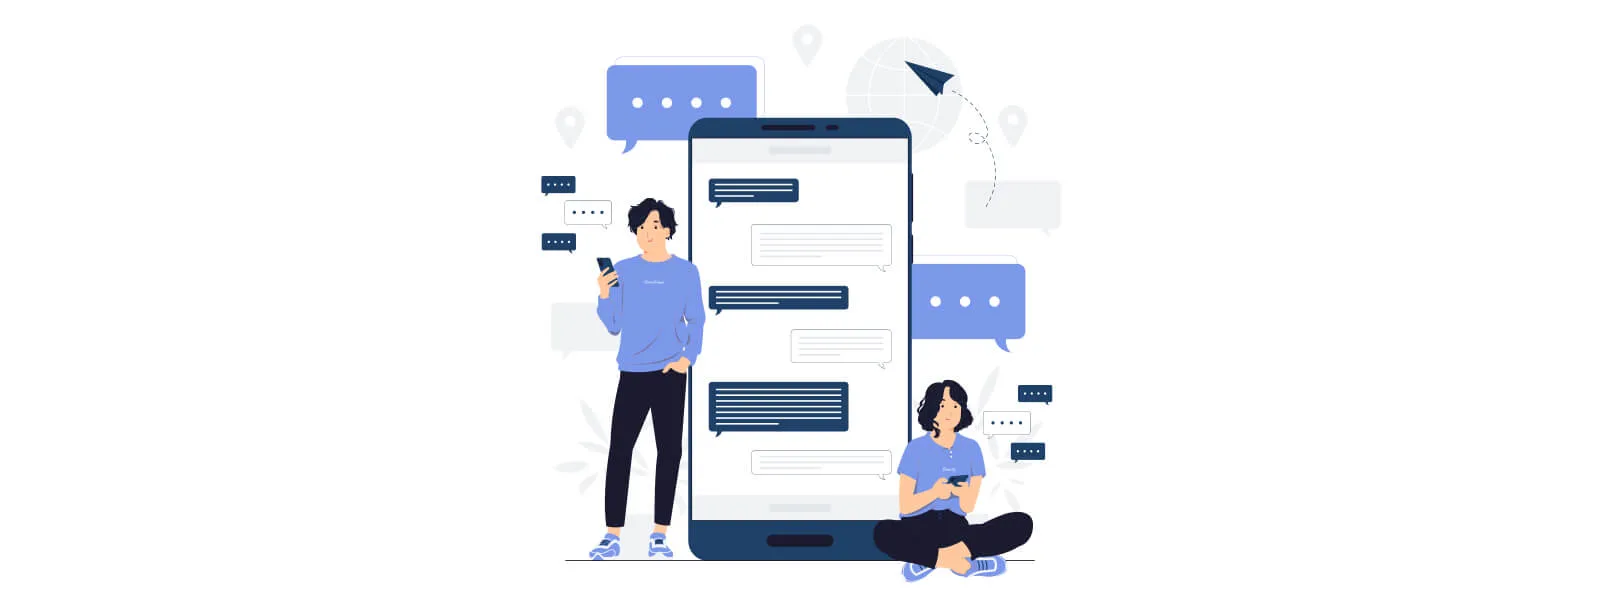 Best practices for user engagement through in app messaging